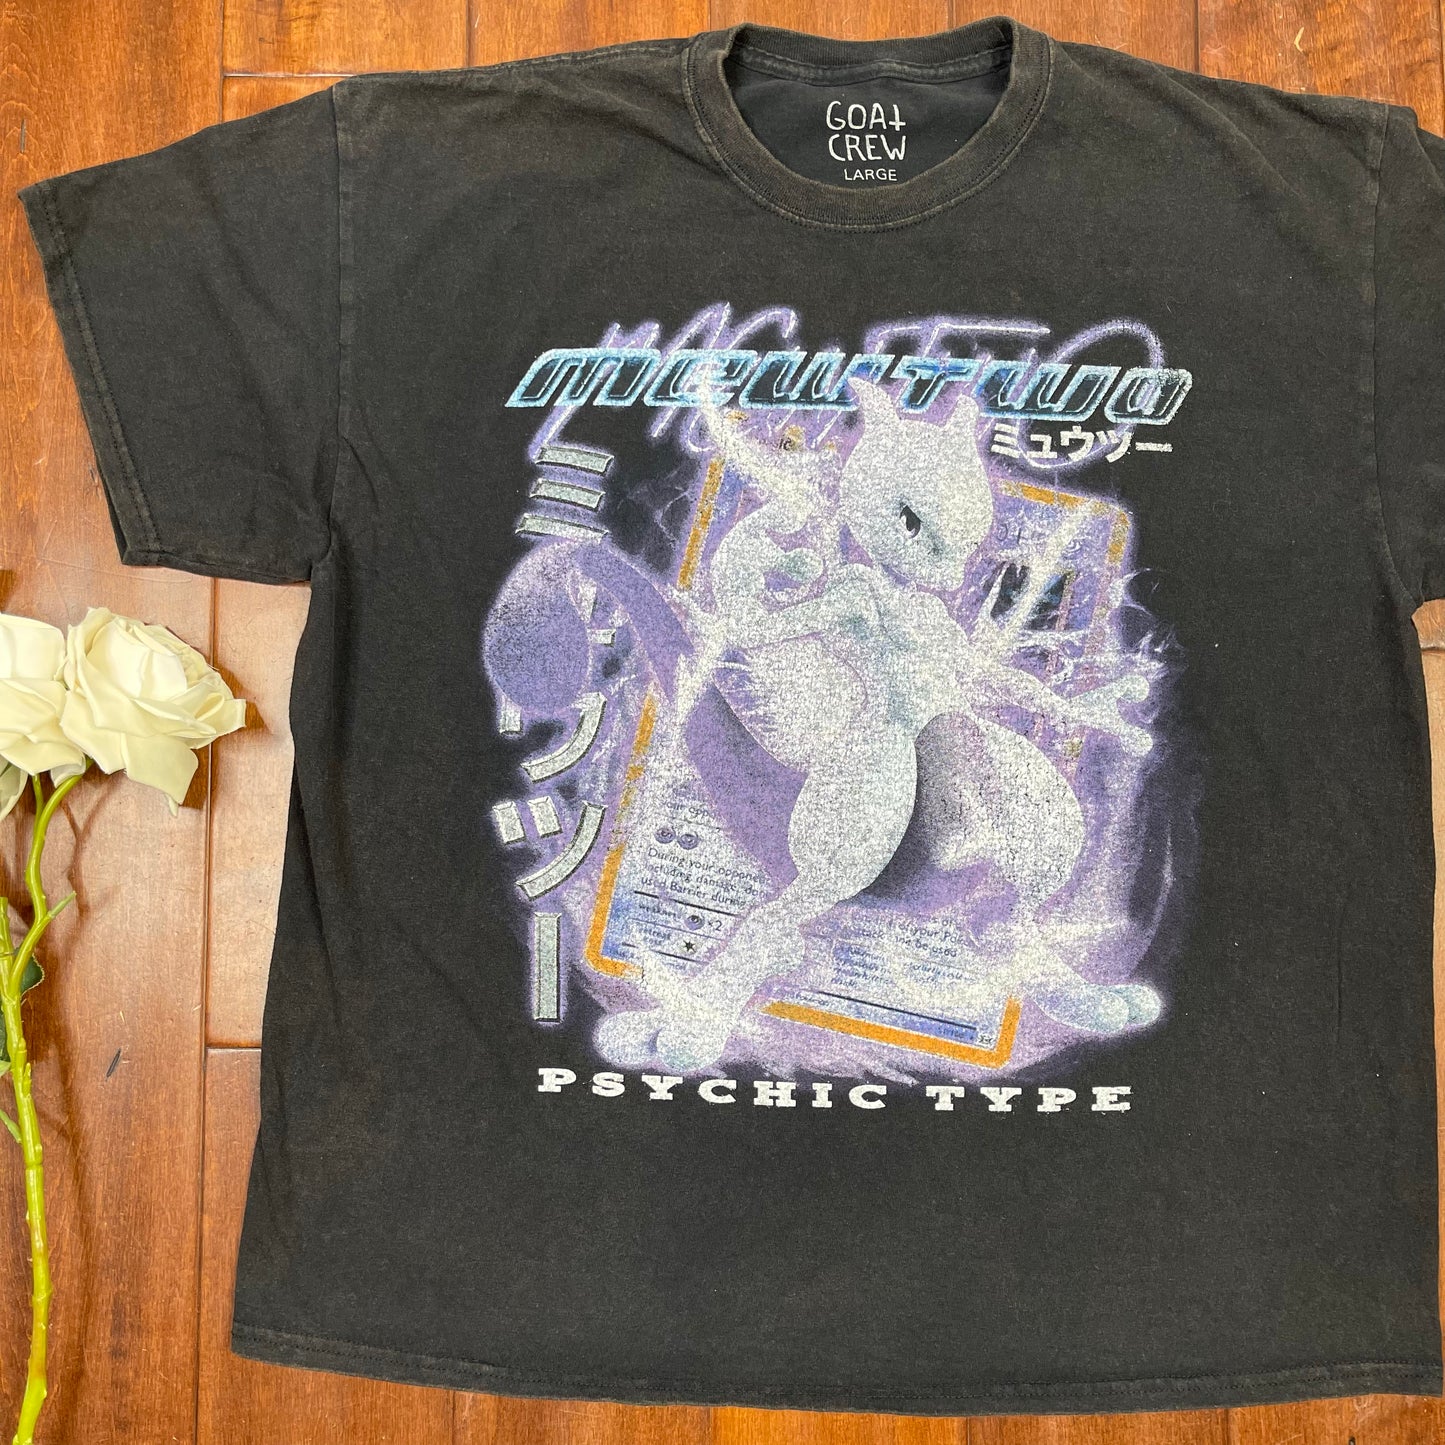 THRIFTED “MEWTWO” T-SHIRT